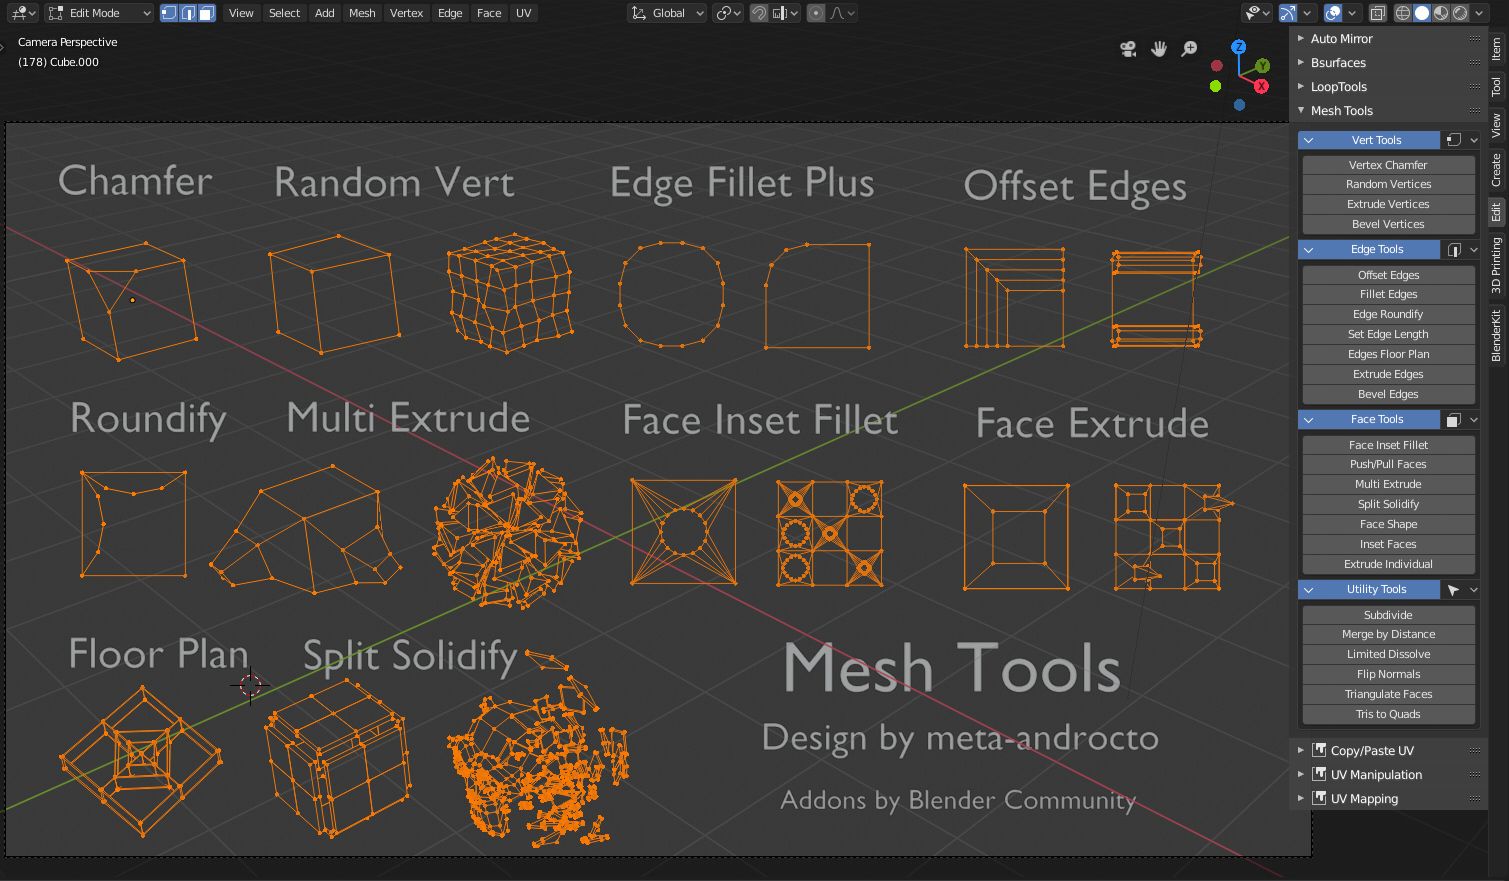 Seagull photography Make way Mesh edit tools 2.8 - Released Scripts and Themes - Blender Artists  Community